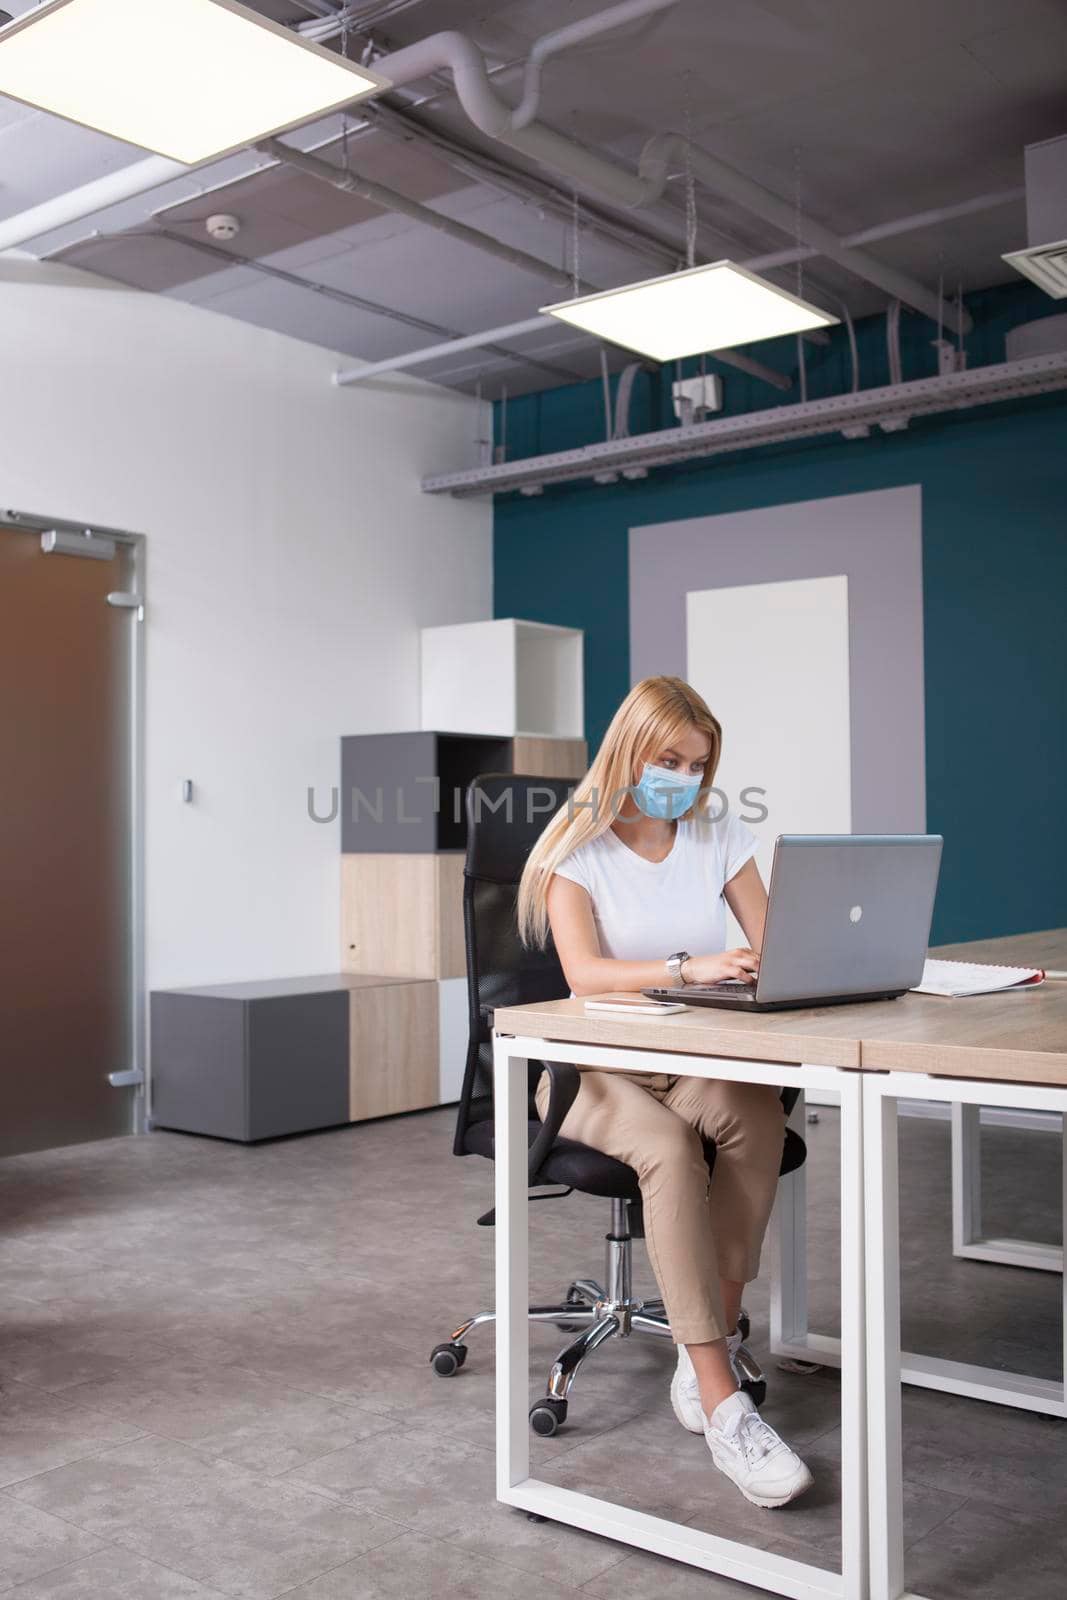 Vertical full length shot of a businesswoman wearing protective face mask working on her laptop at open space office